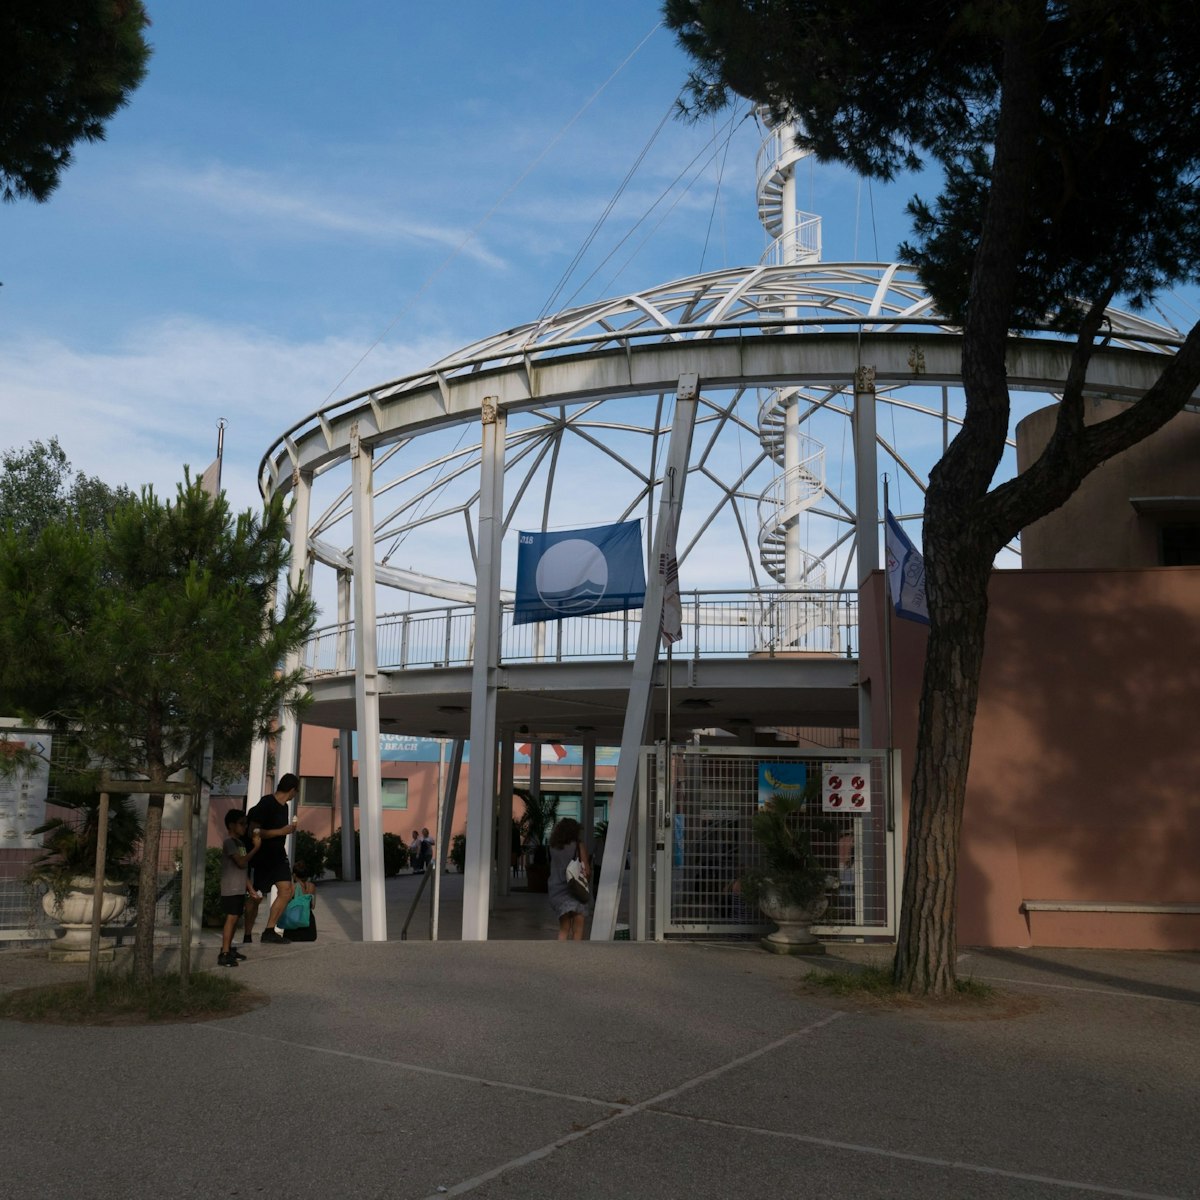 The entrance to the Blue Moon beach lies at the top of the main drag on the Lido